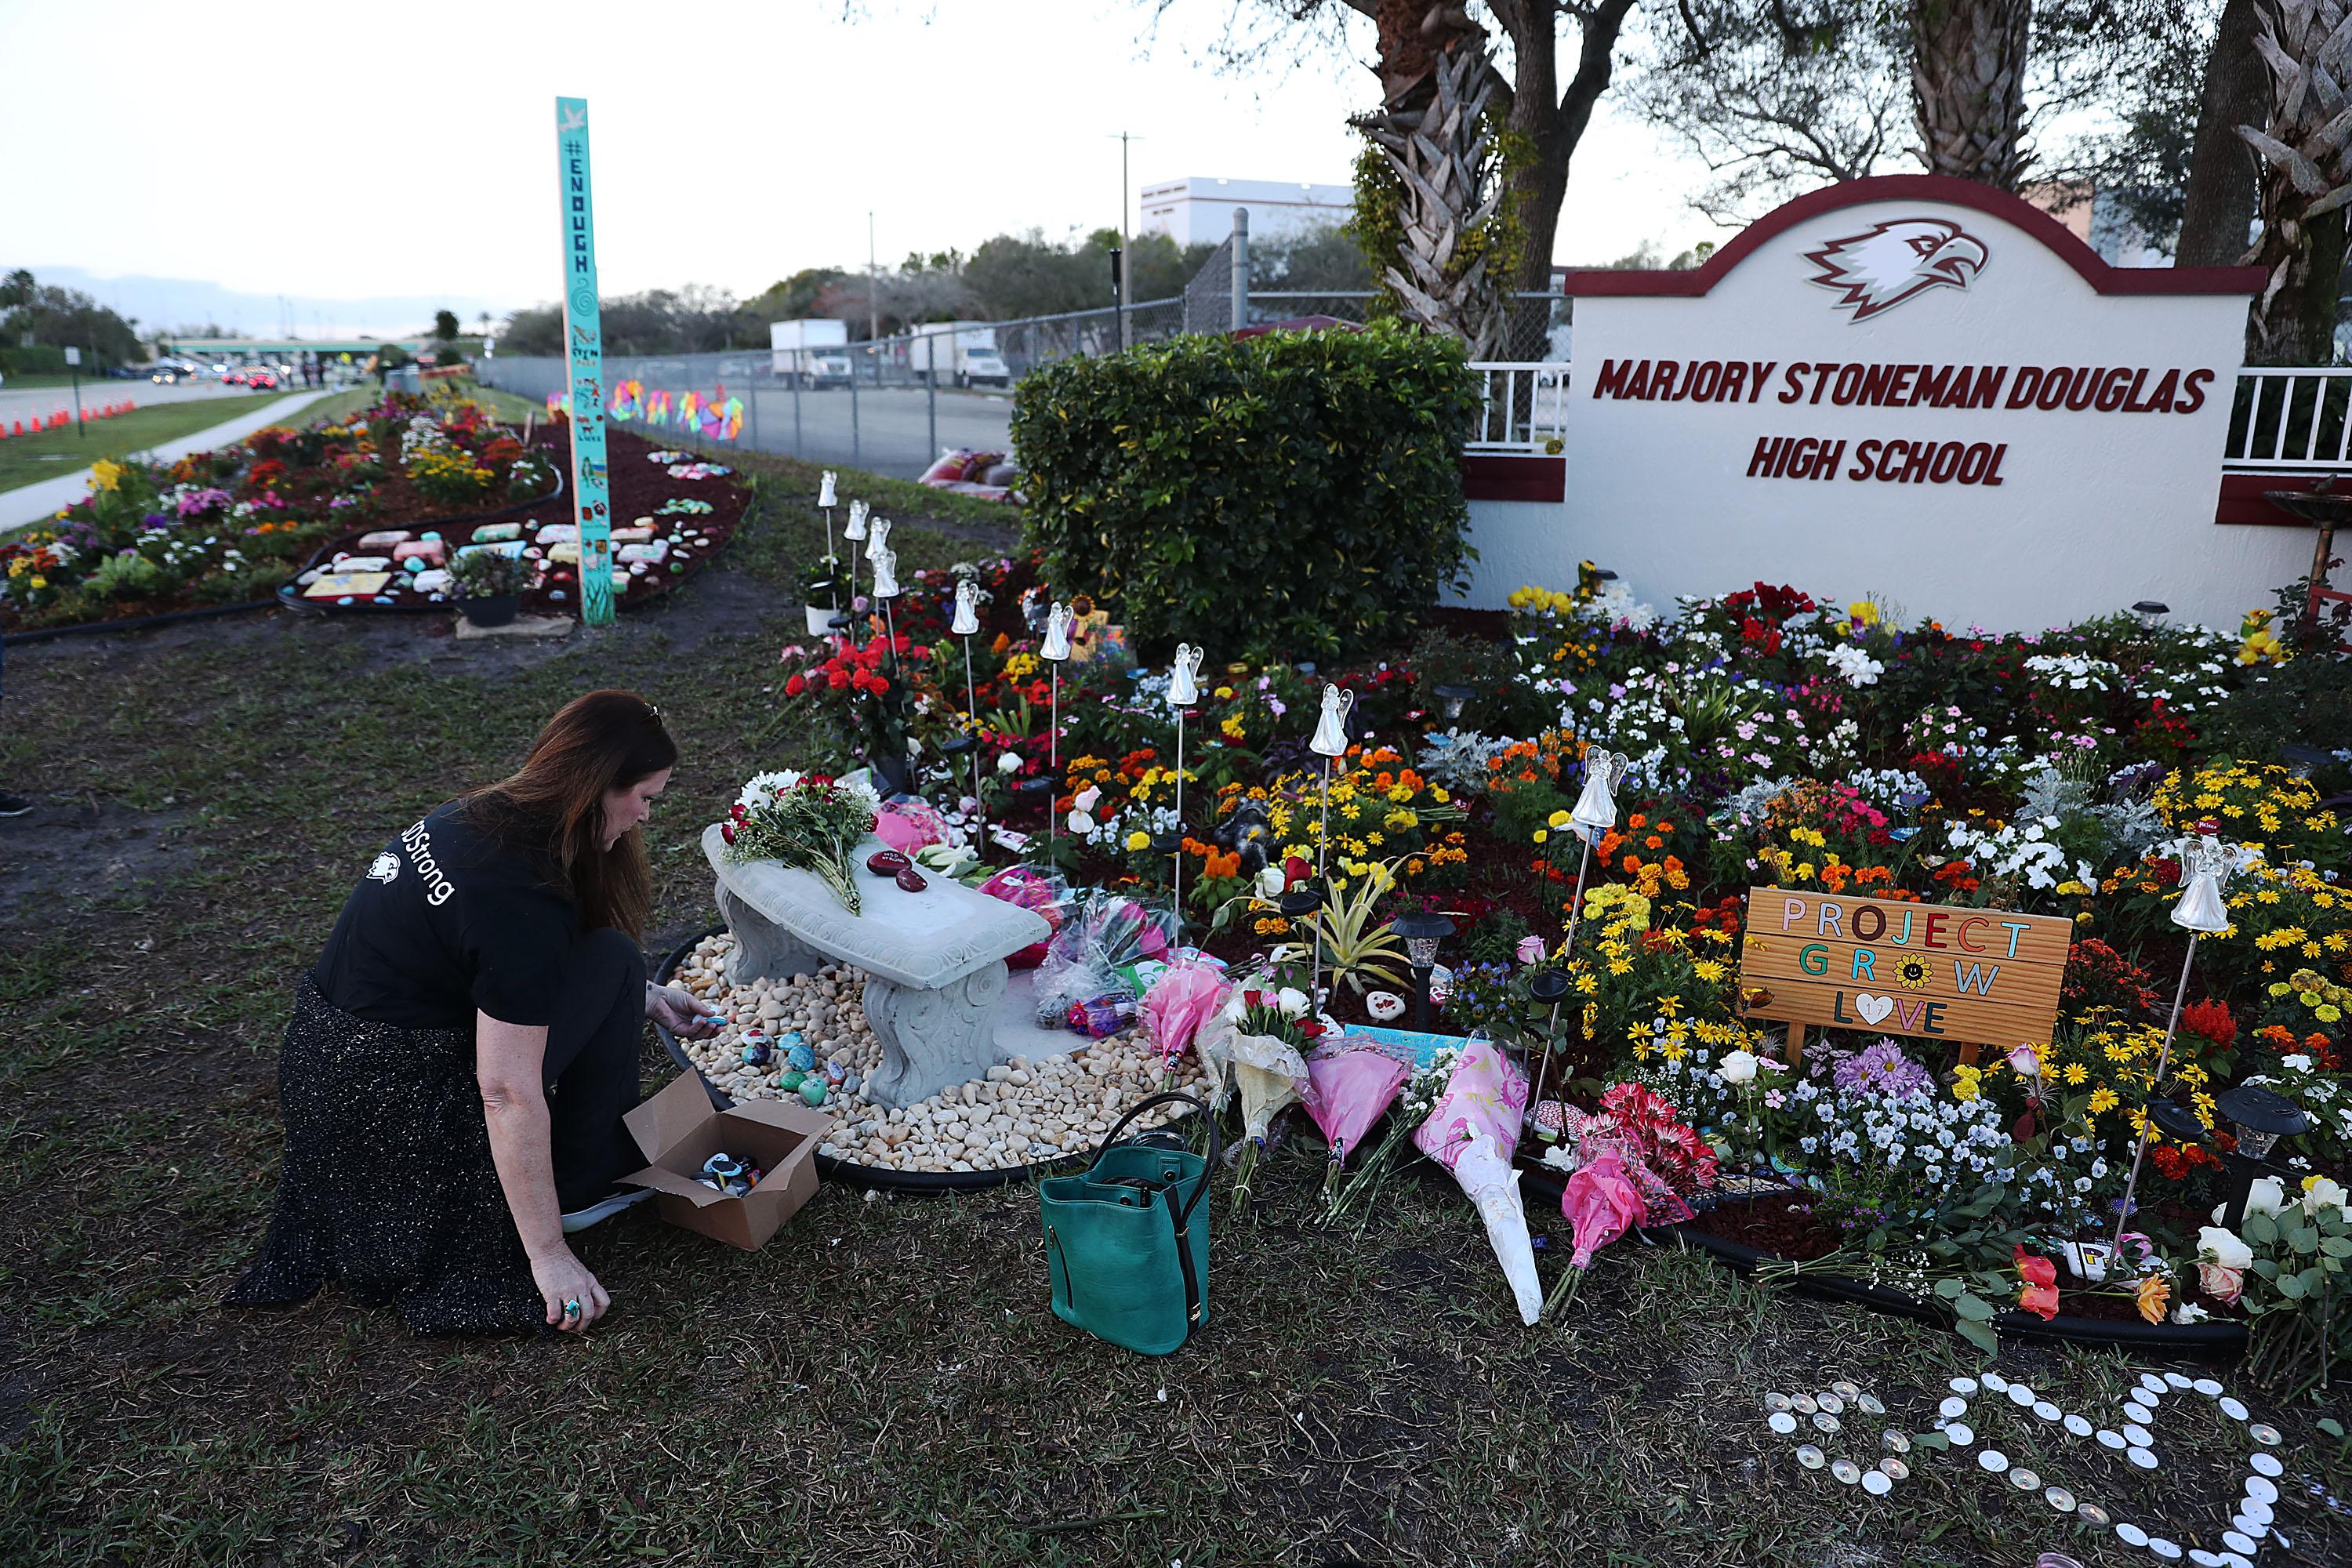 A memorial setup at Marjory Stoneman Douglas High School for those killed during a mass shooting in Parkland, Florida.